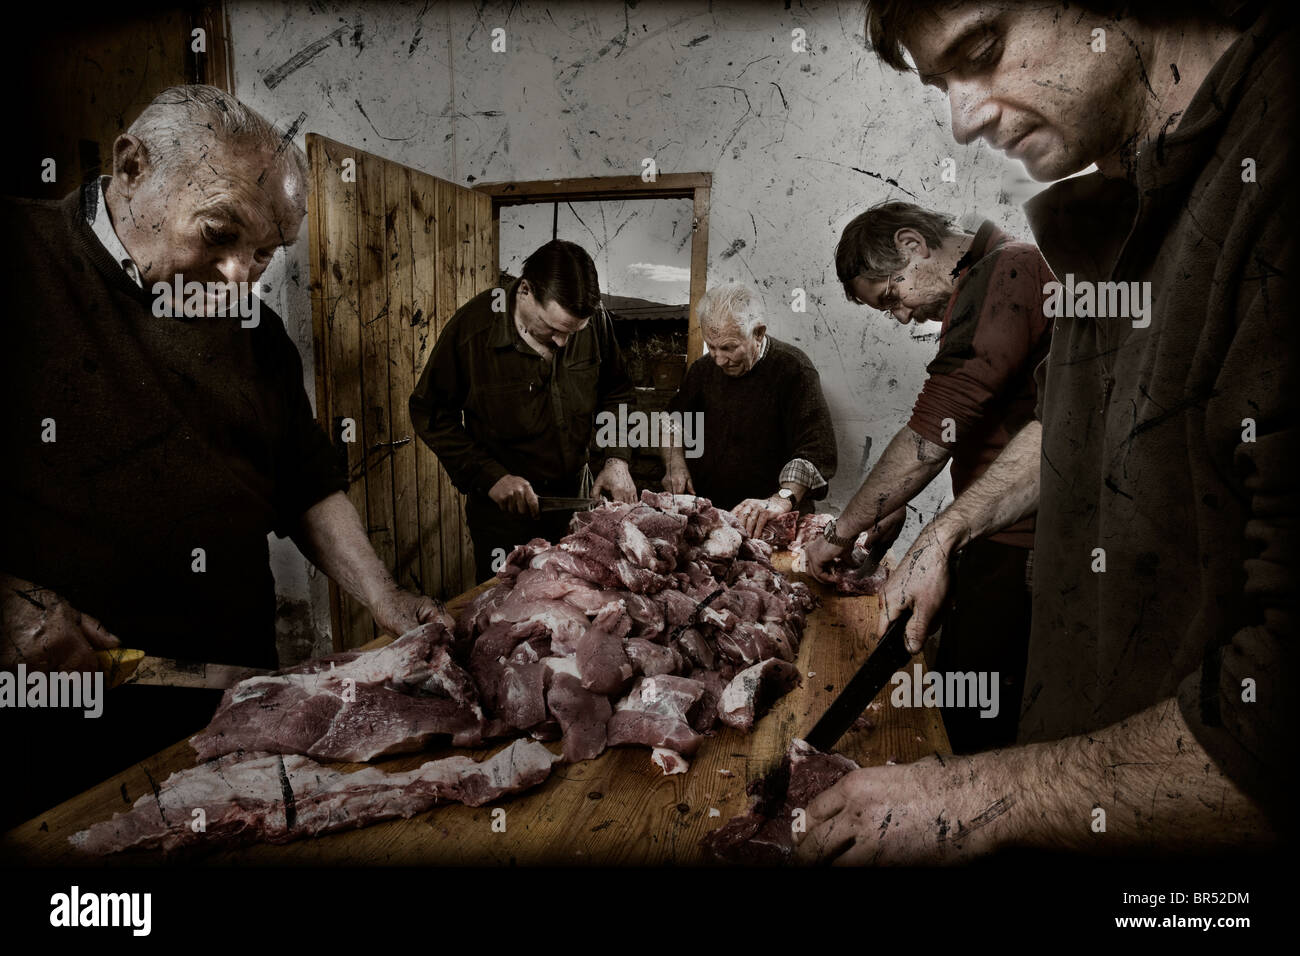 Five people cutting the meat of the slaughtered pig. Stock Photo